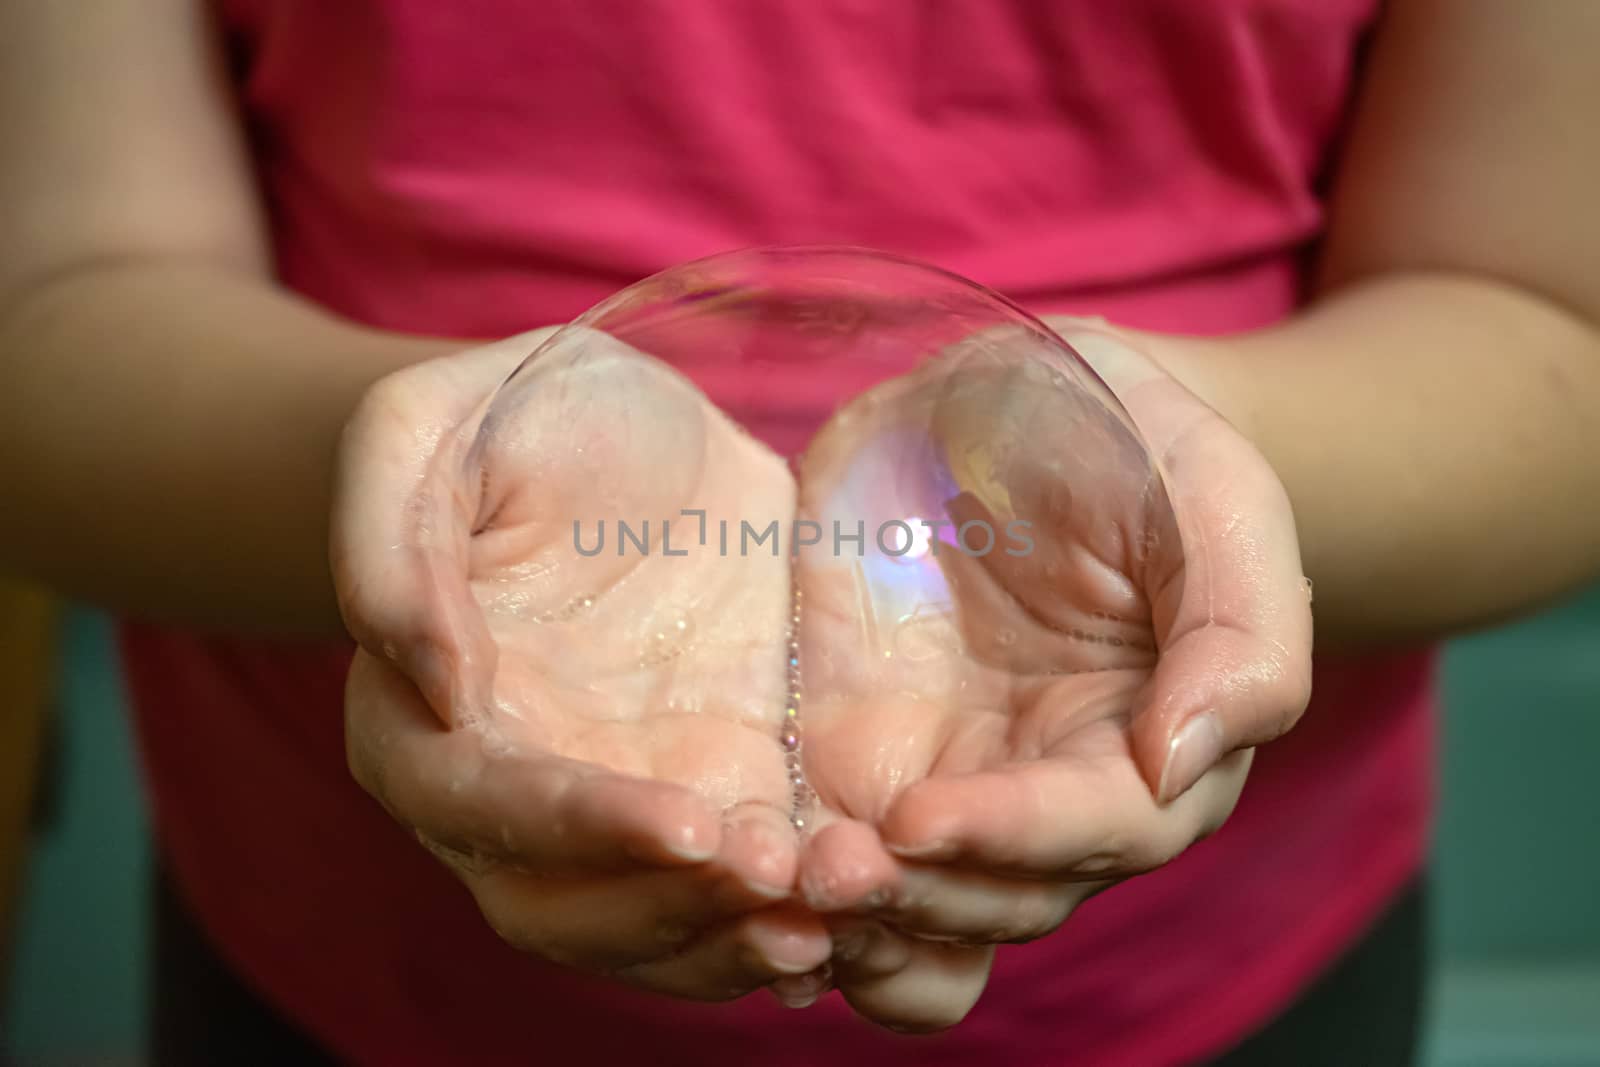 in the hands of the baby a big soap bubble